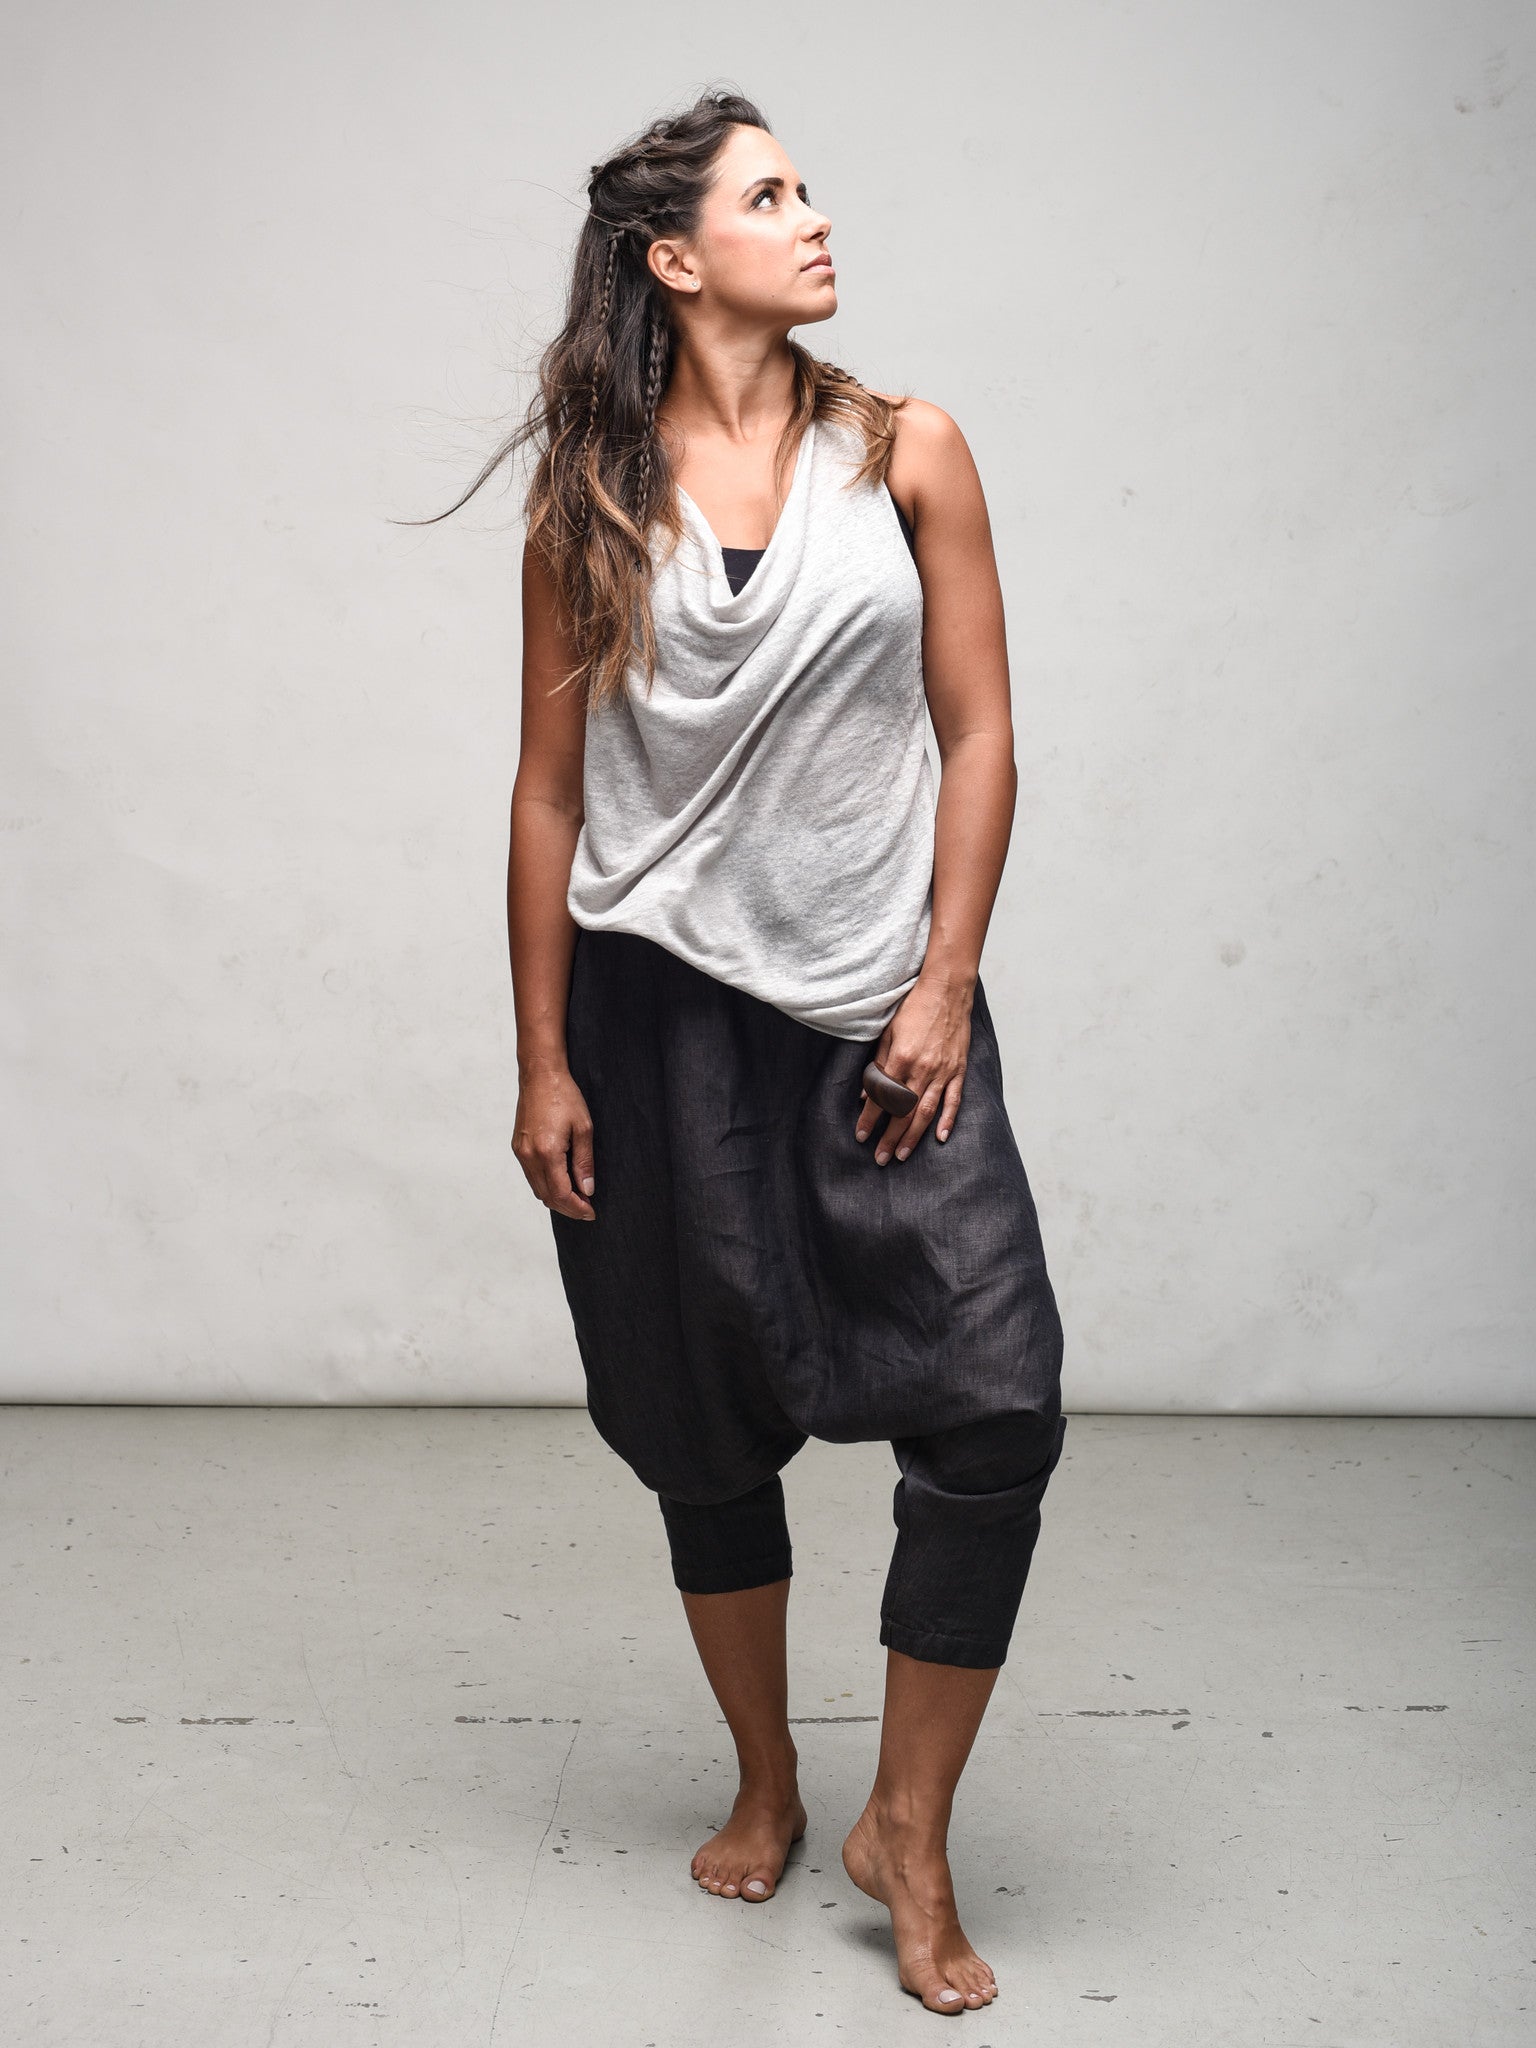 Zen Nomad Linen delphine racerback, drape neck, top for layering over dress, tanks to add elegance and texture